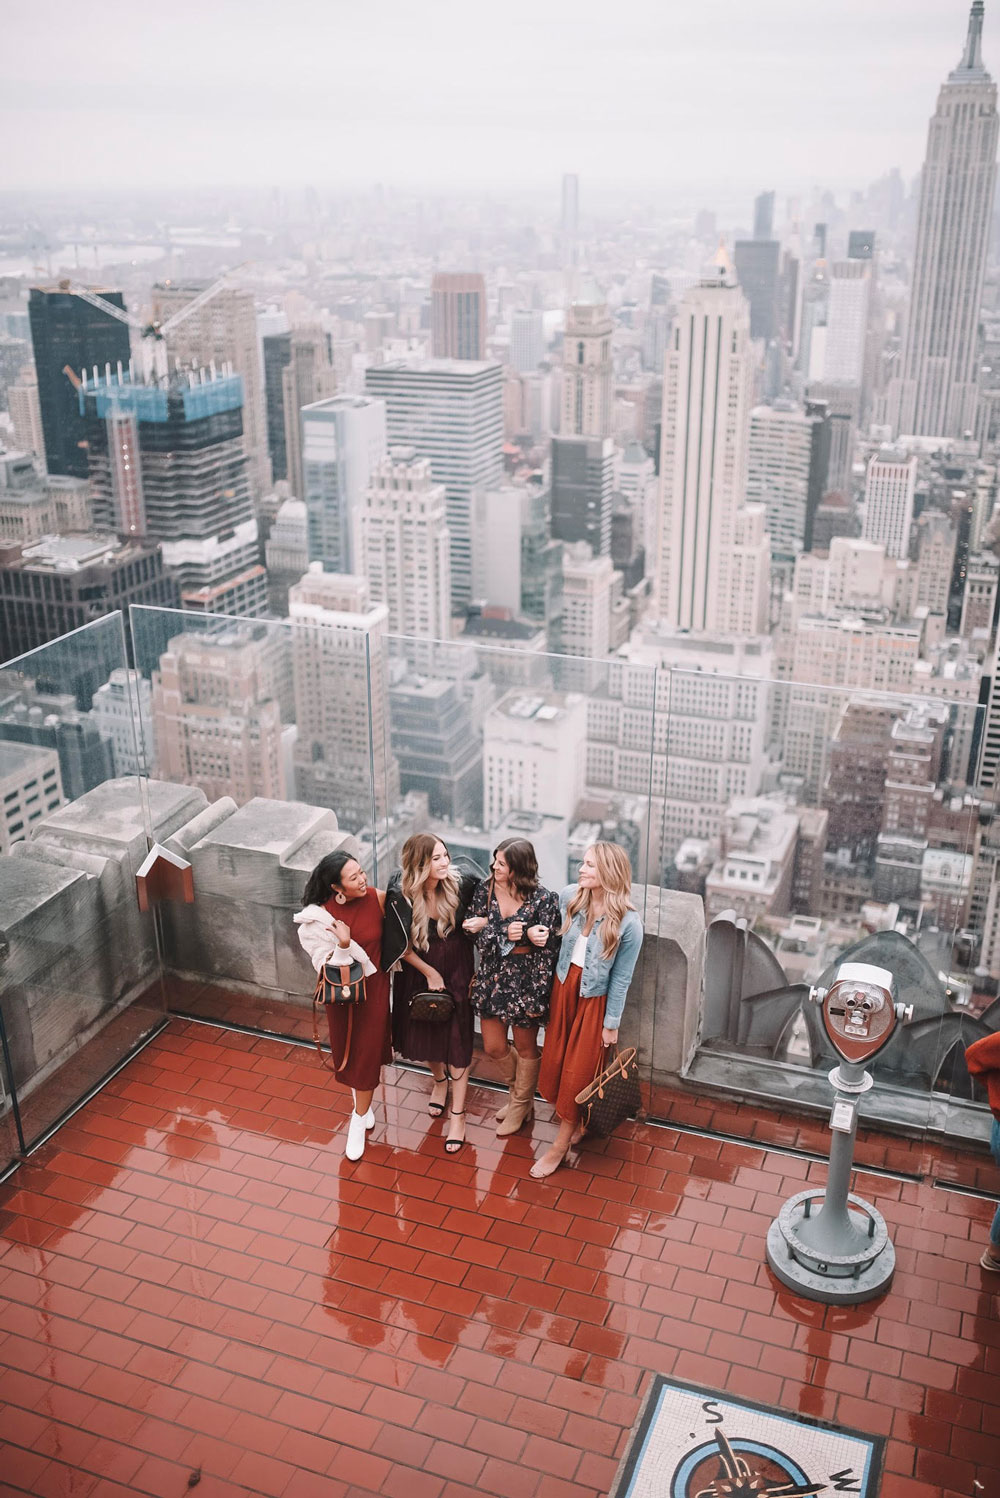 Most Instagrammable Spots in NYC: Top of the Rock